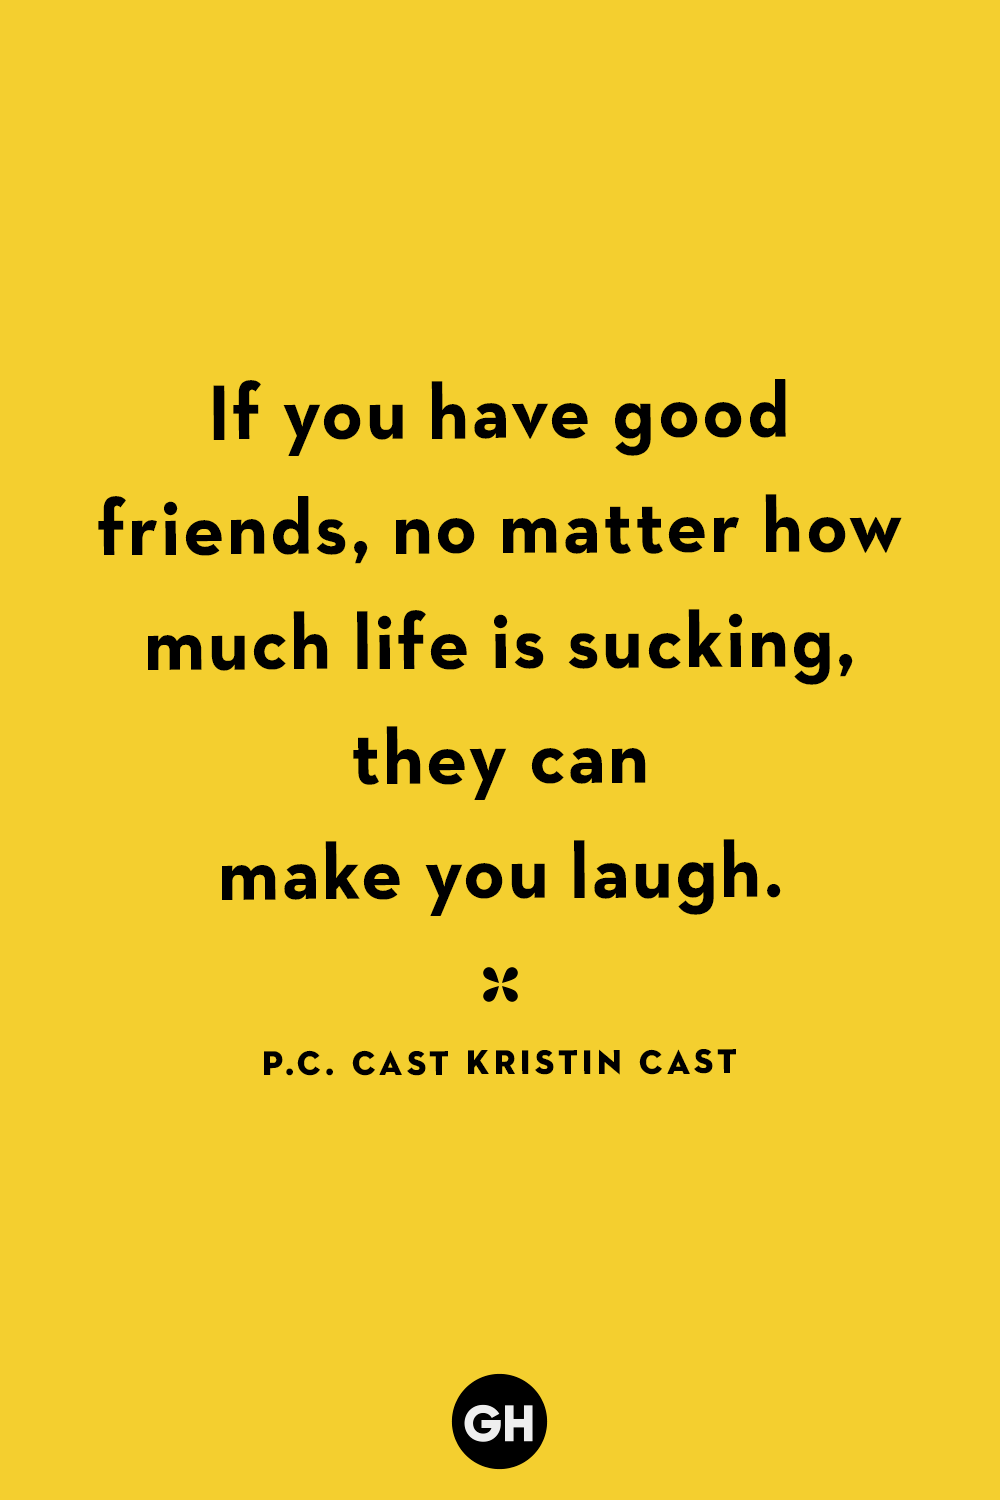 True Friends Quotes And Sayings